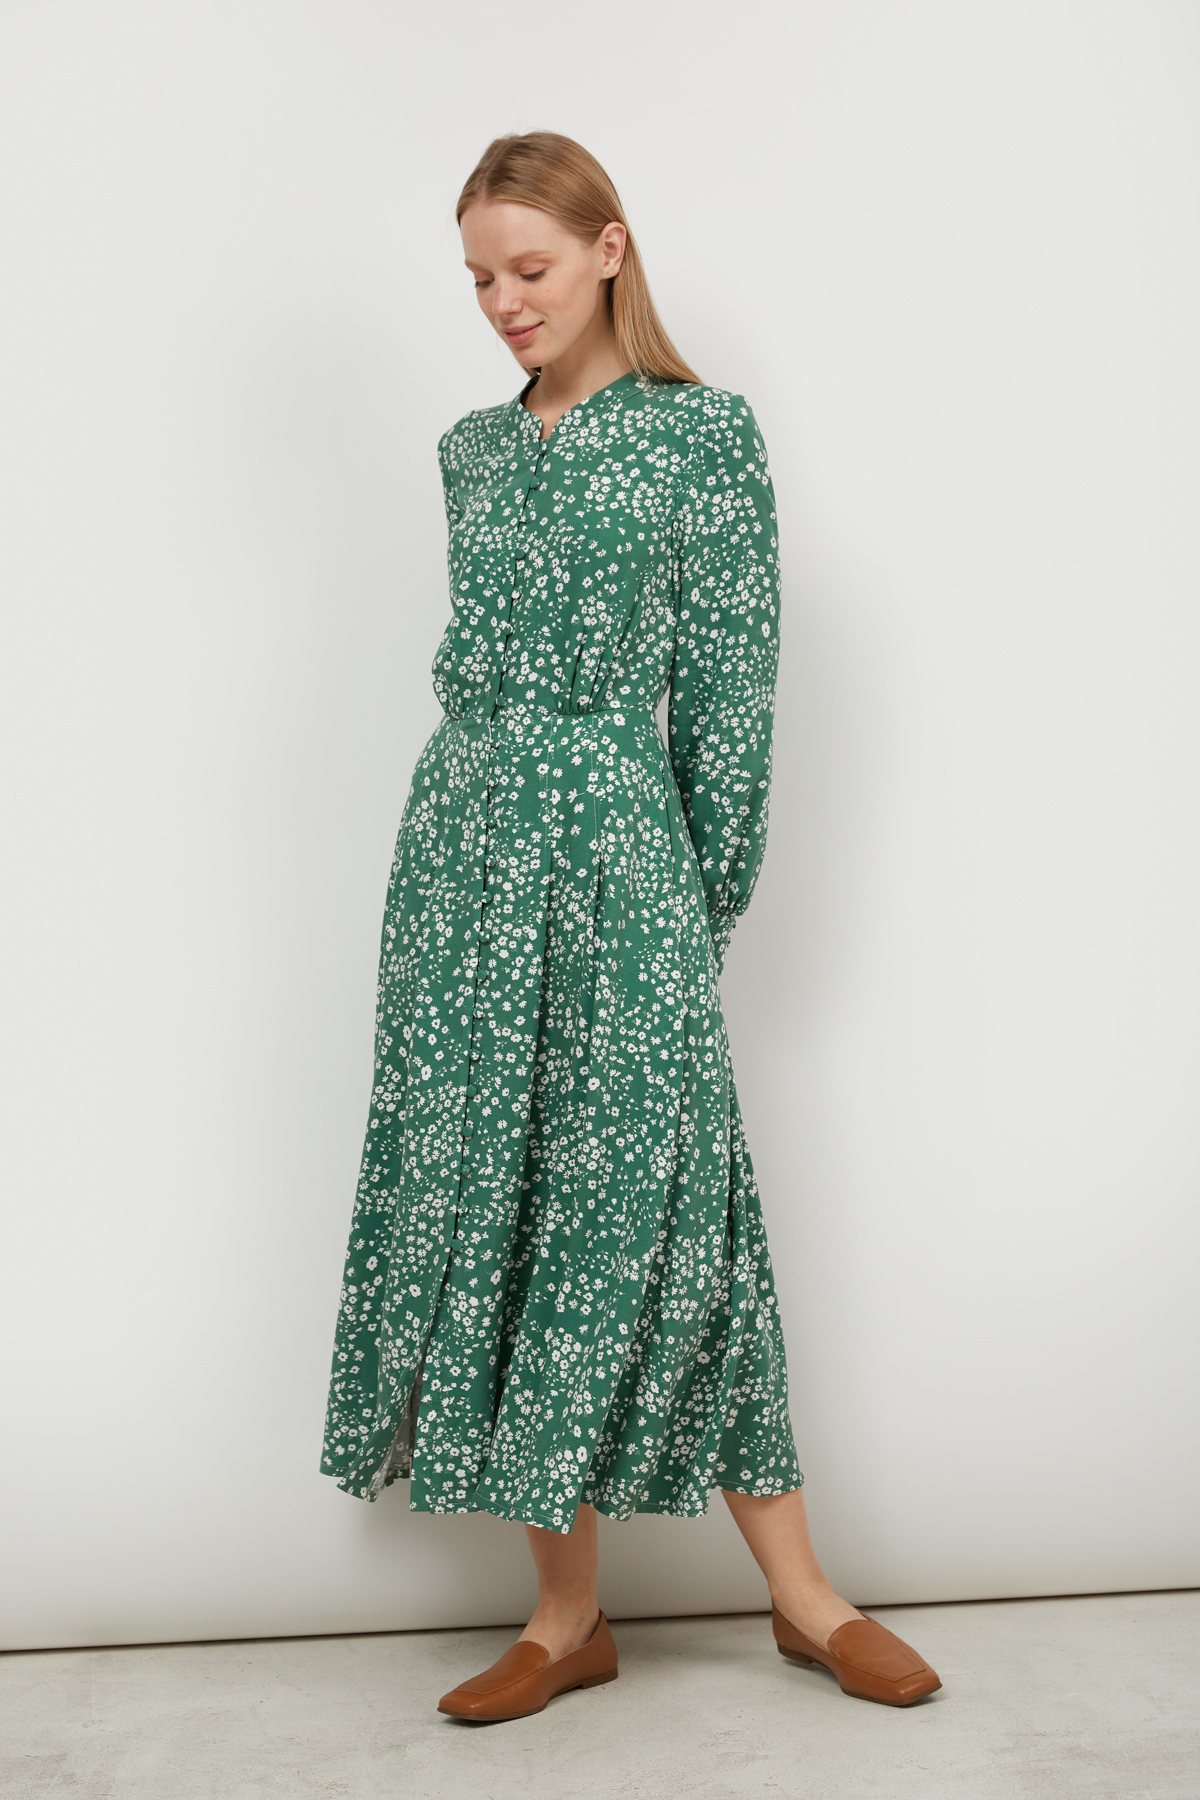 Midi dress with viscose green in flowers print, photo 1